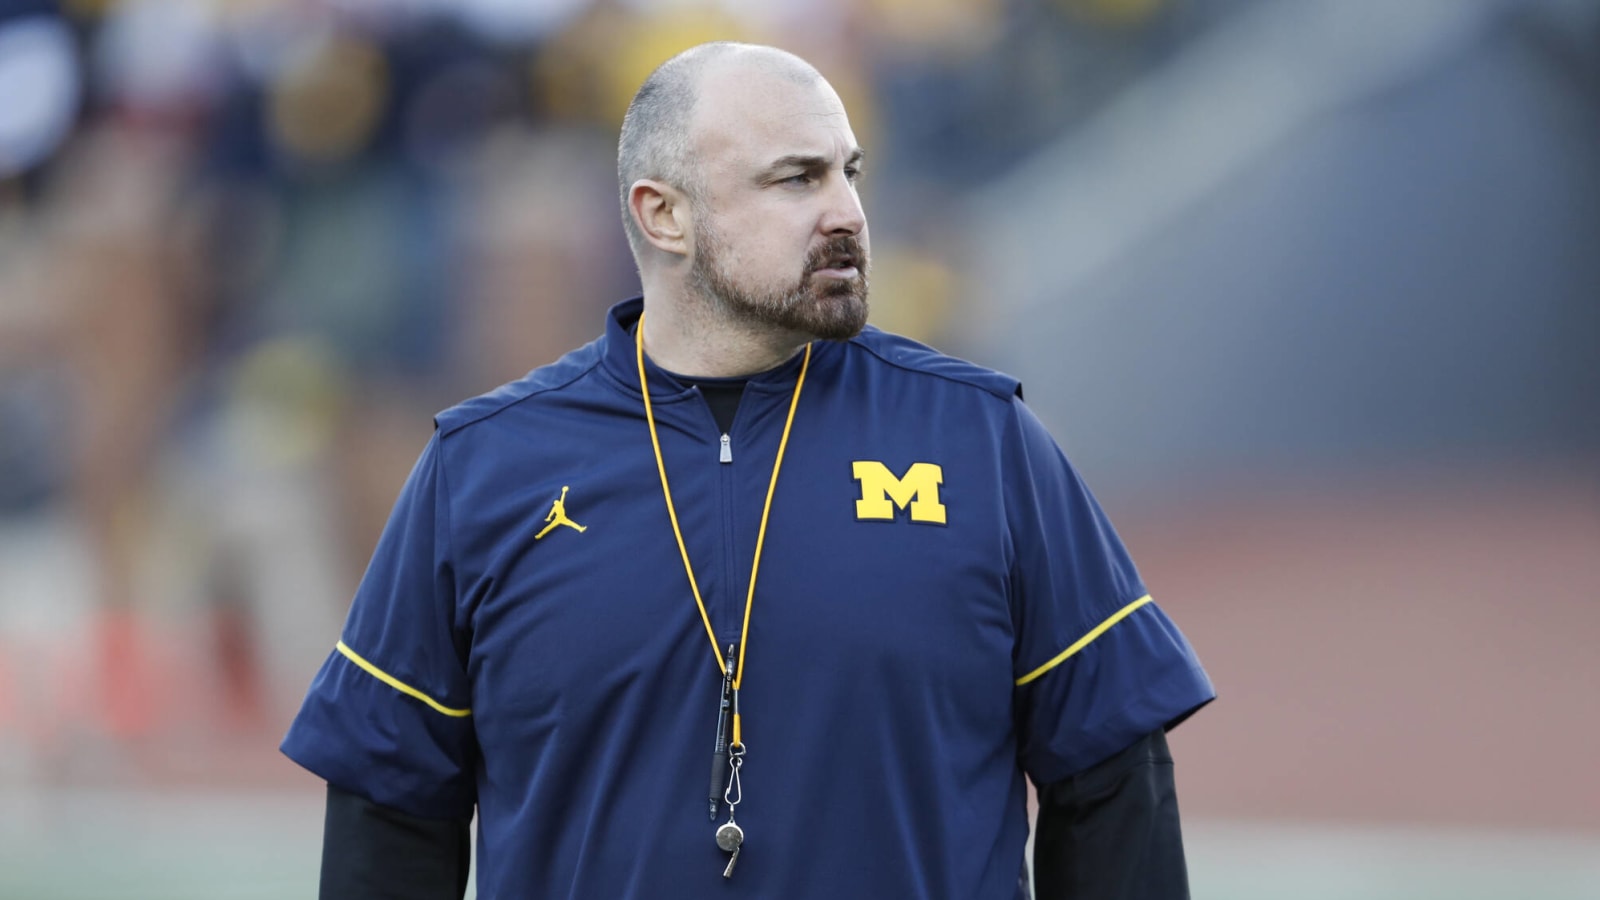 More turmoil for Michigan as assistant coach is fired